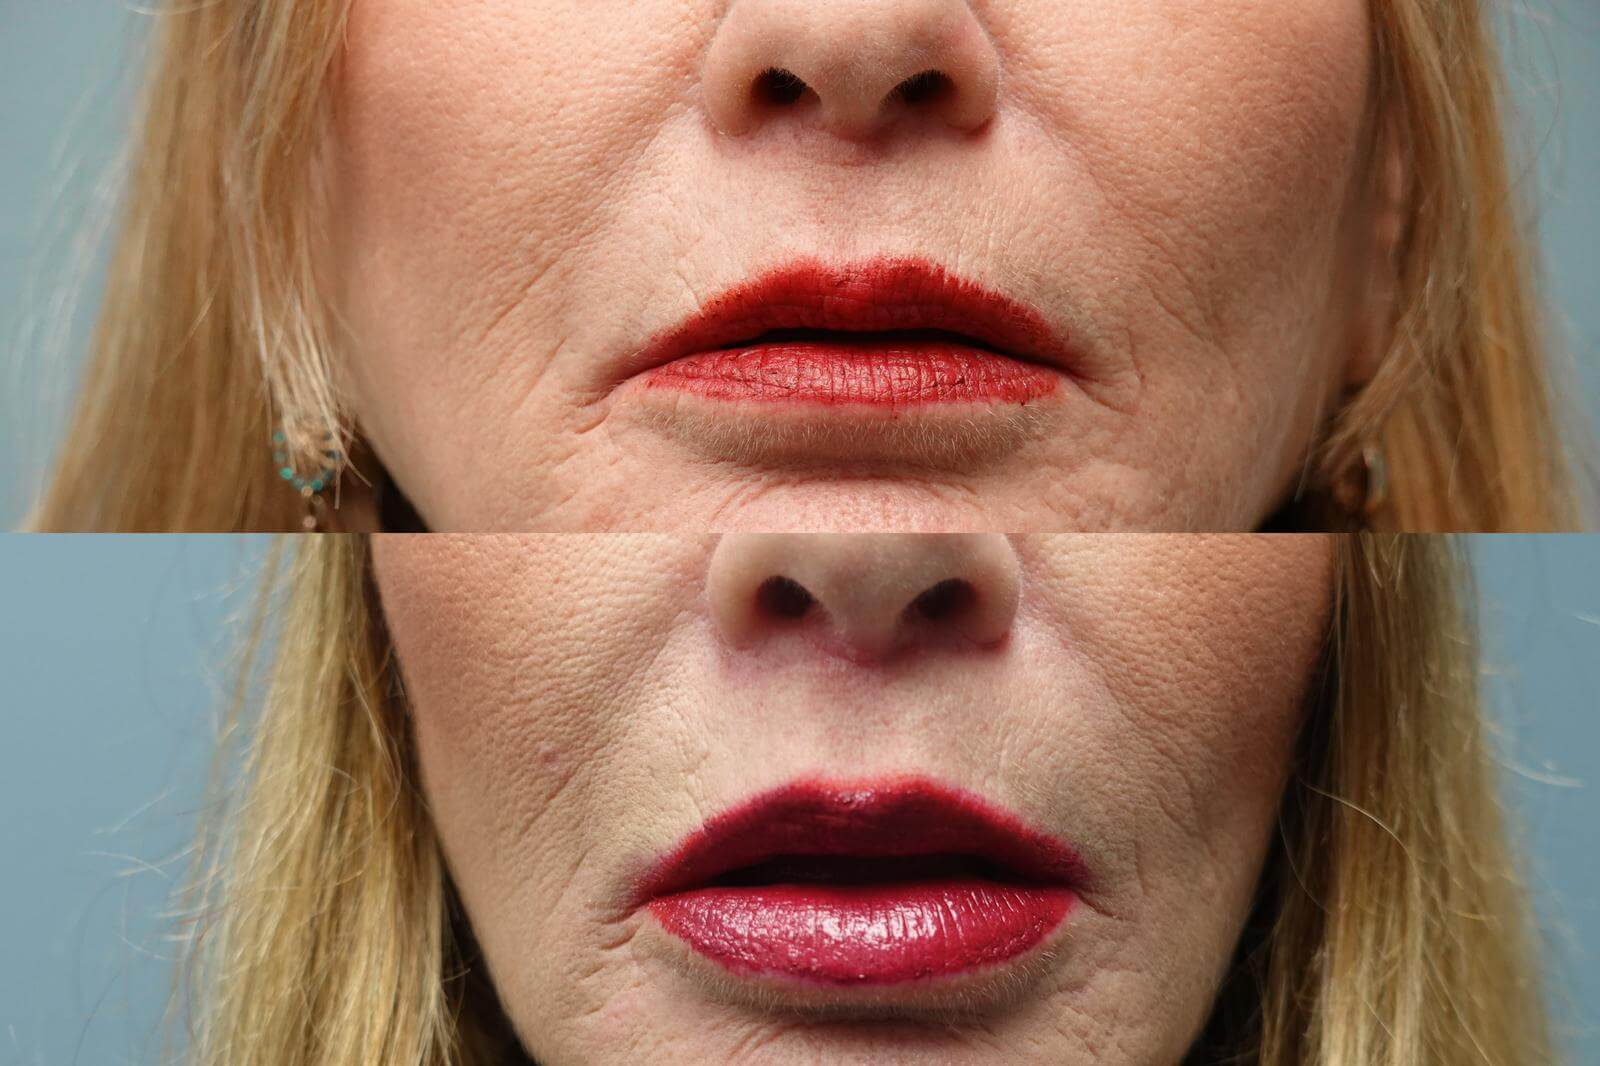 Before and After 4 month of Bullhorn Lip Lift by Dr Finger to correct asmmetry and to shorten distance between nose and upper lip